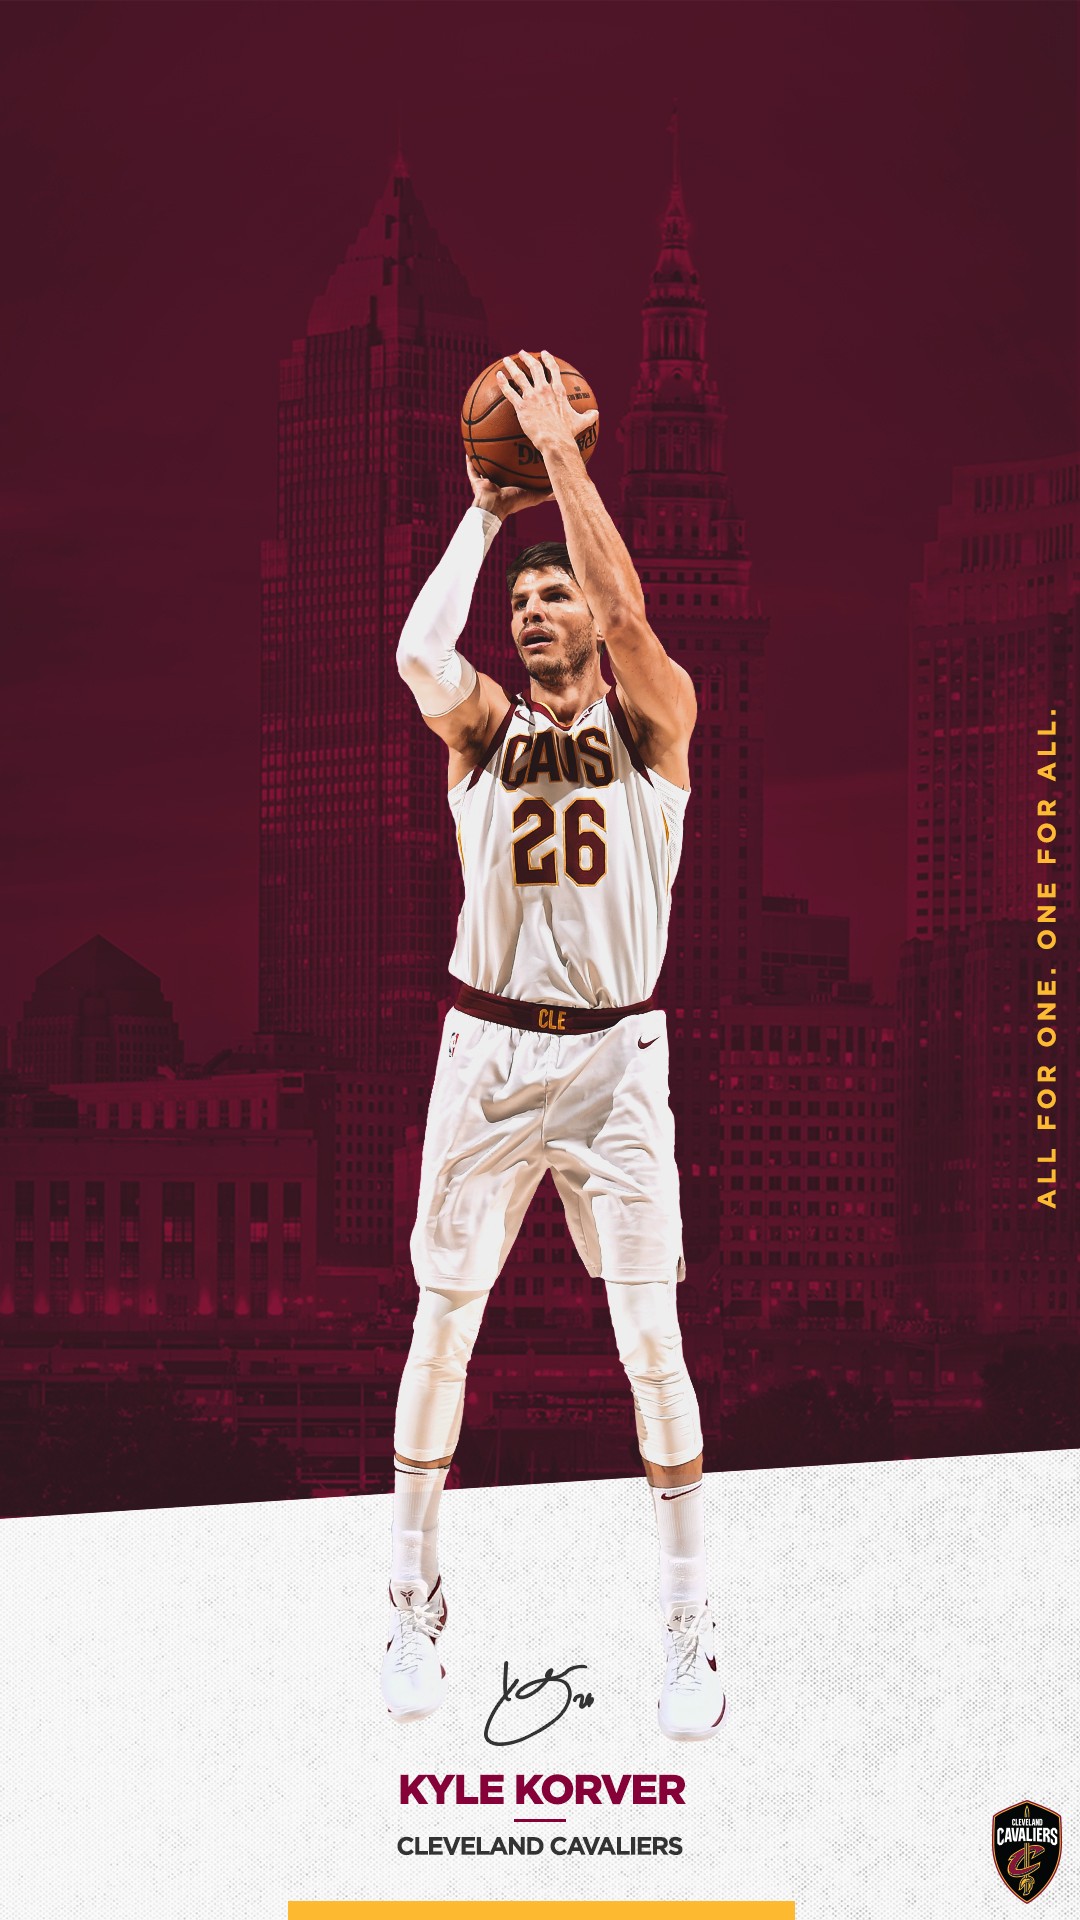 kyle korver wallpaper,sports equipment,performance,talent show,sports collectible,basketball player